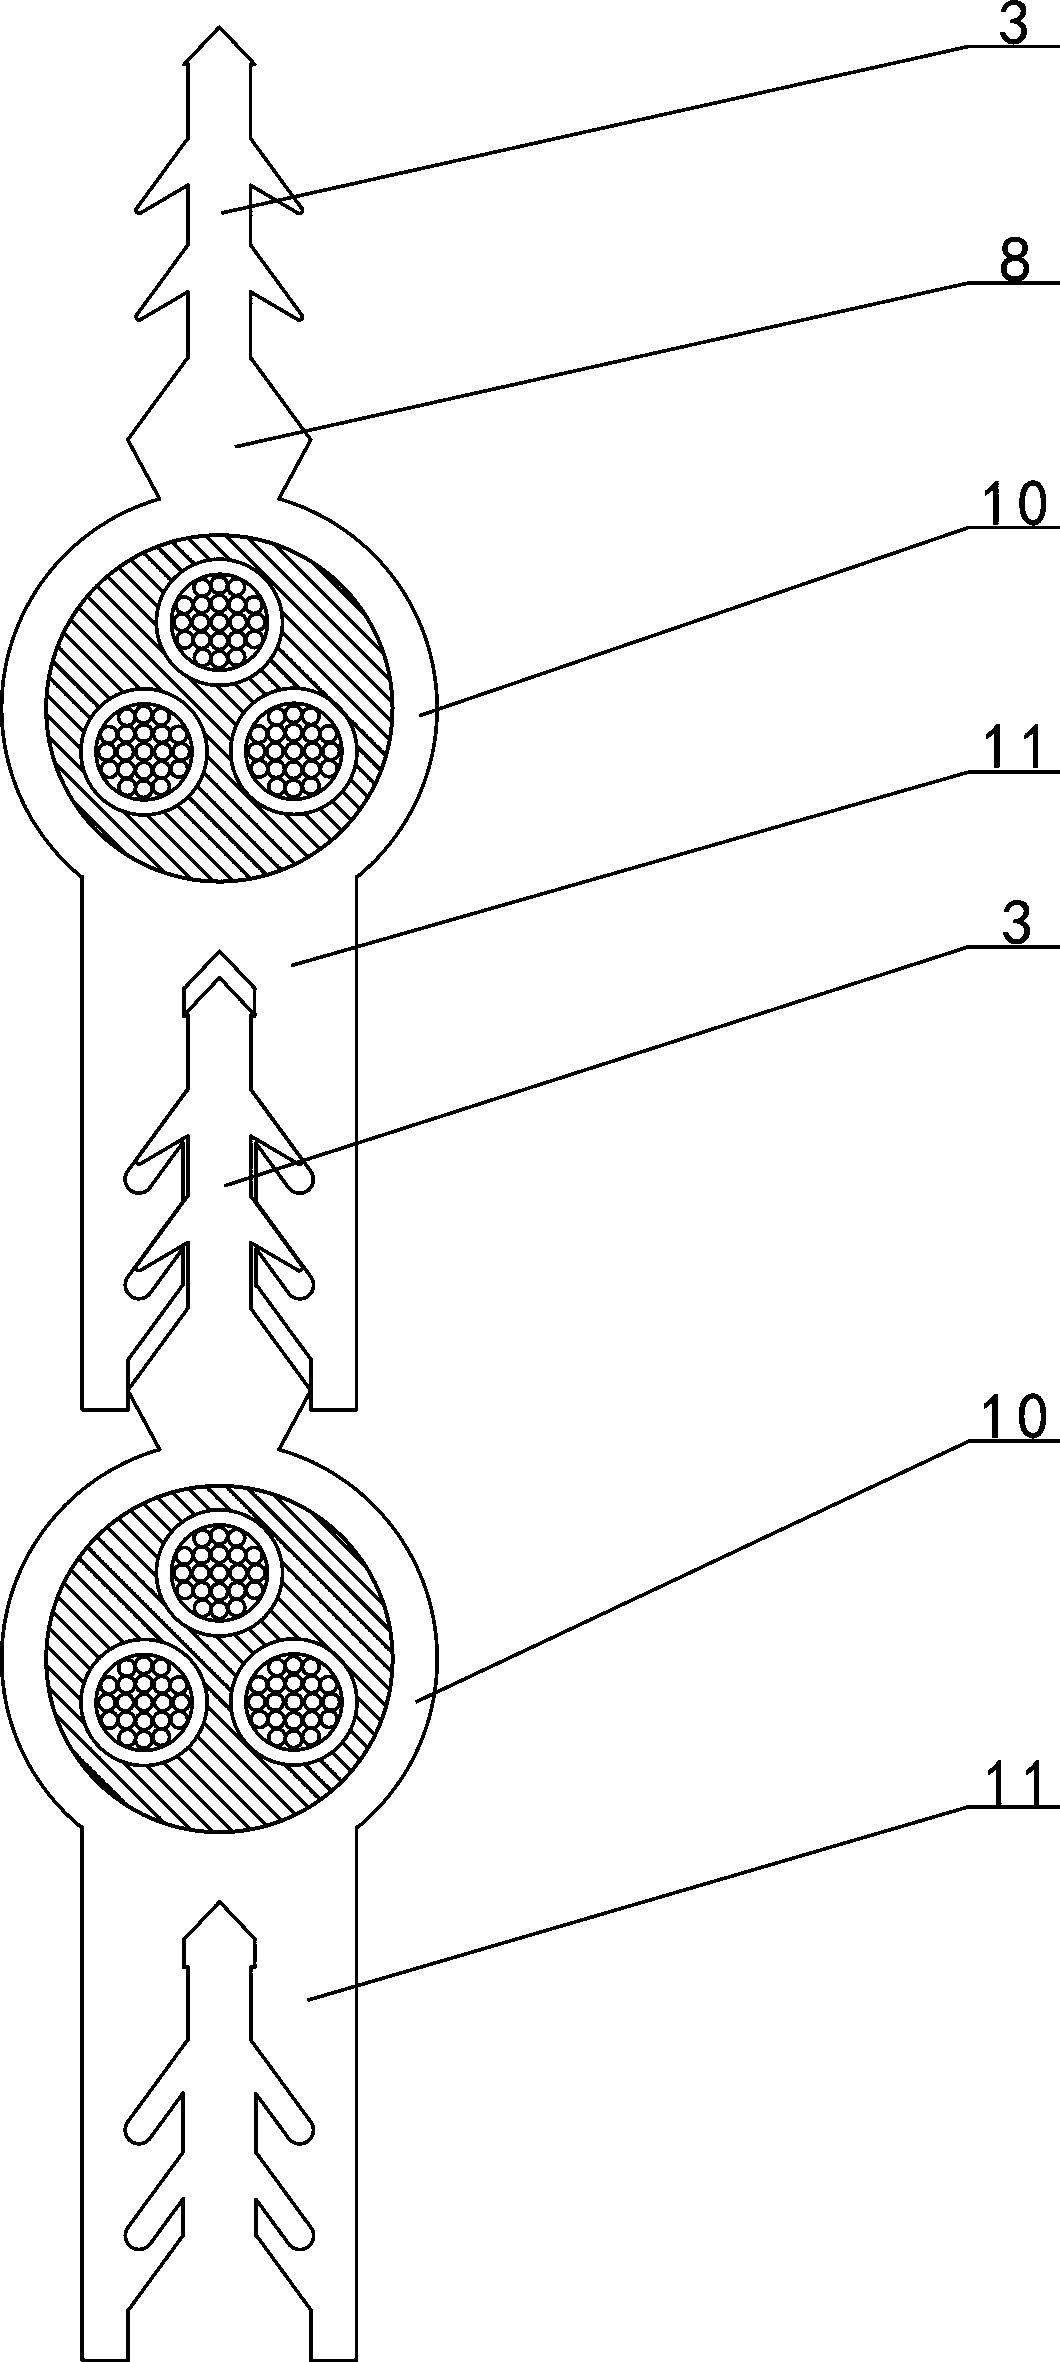 A cable connection structure